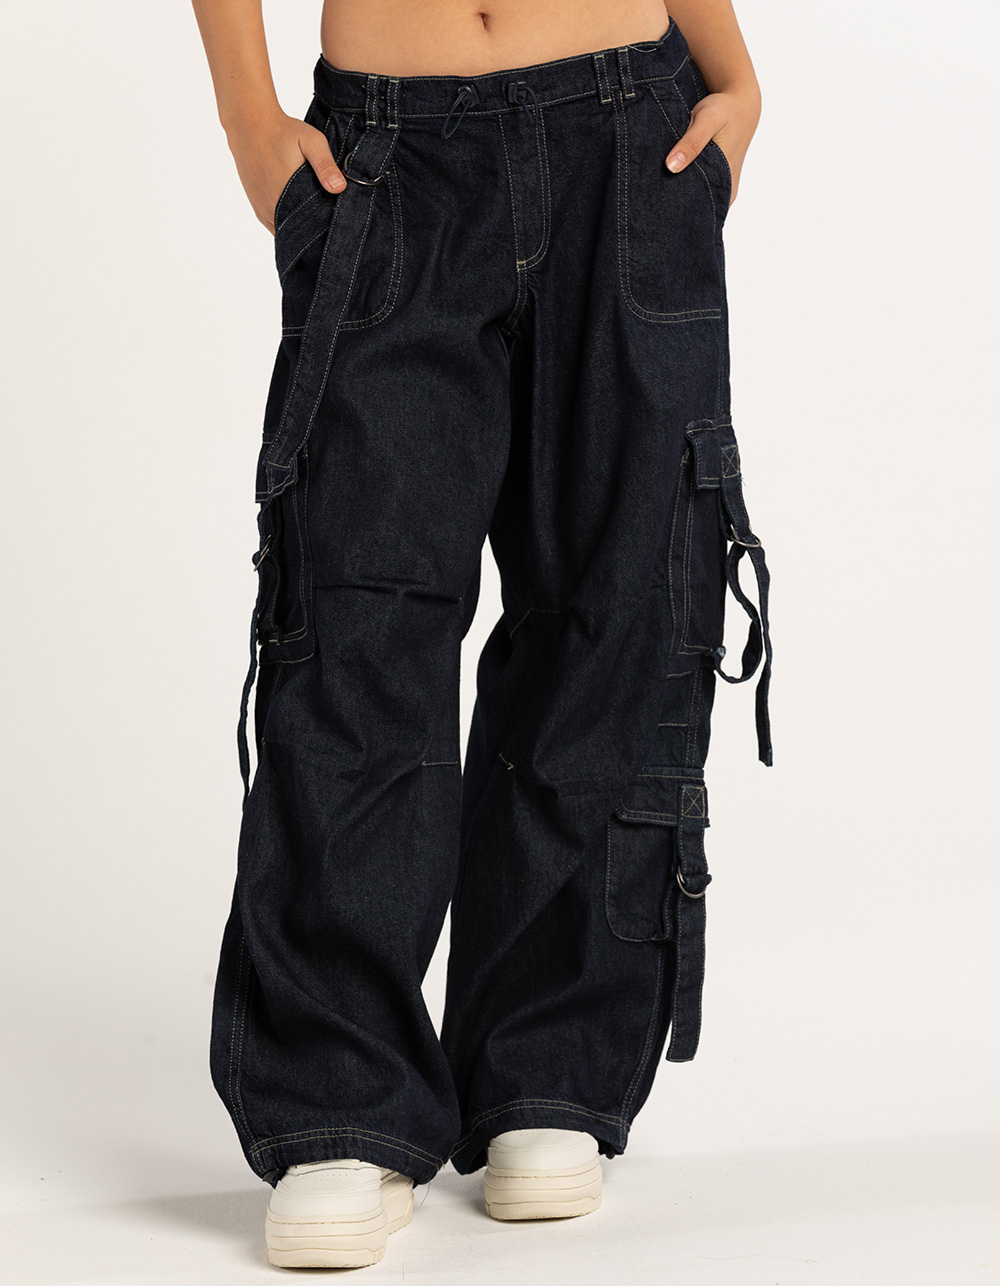 In And Array of BDG Urban Outfitters Strappy Cargo Womens Pants - RINSE | Tillys